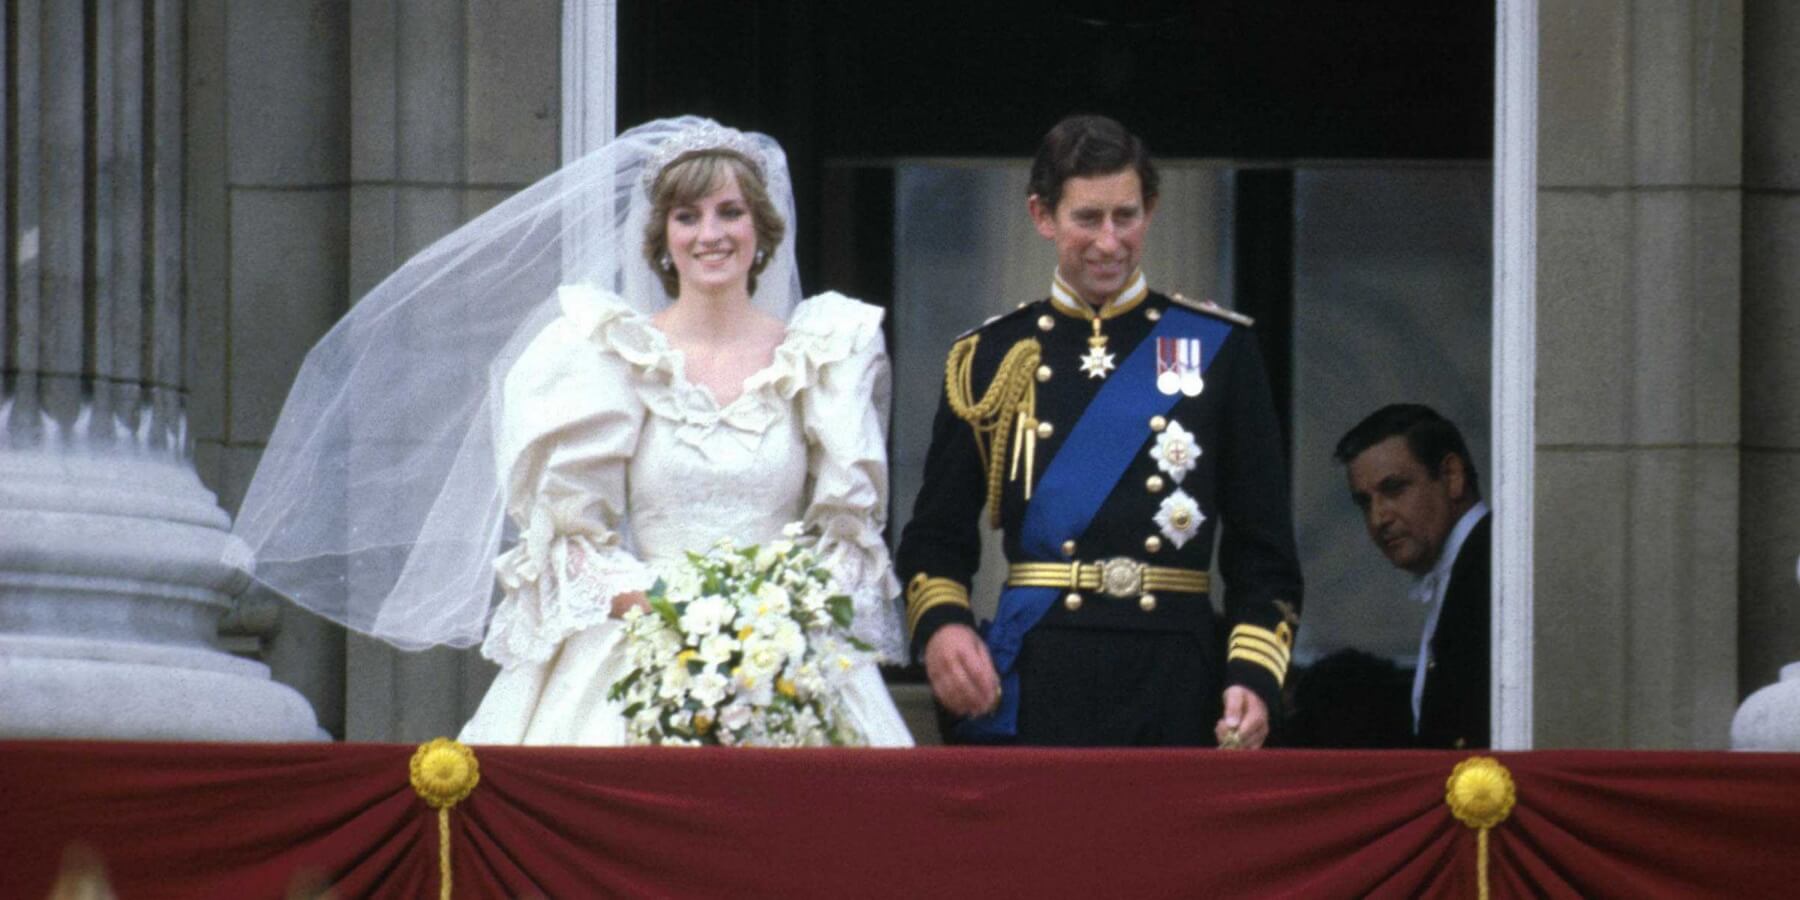 The wedding of Princess Diana and Prince Charles in July 1981